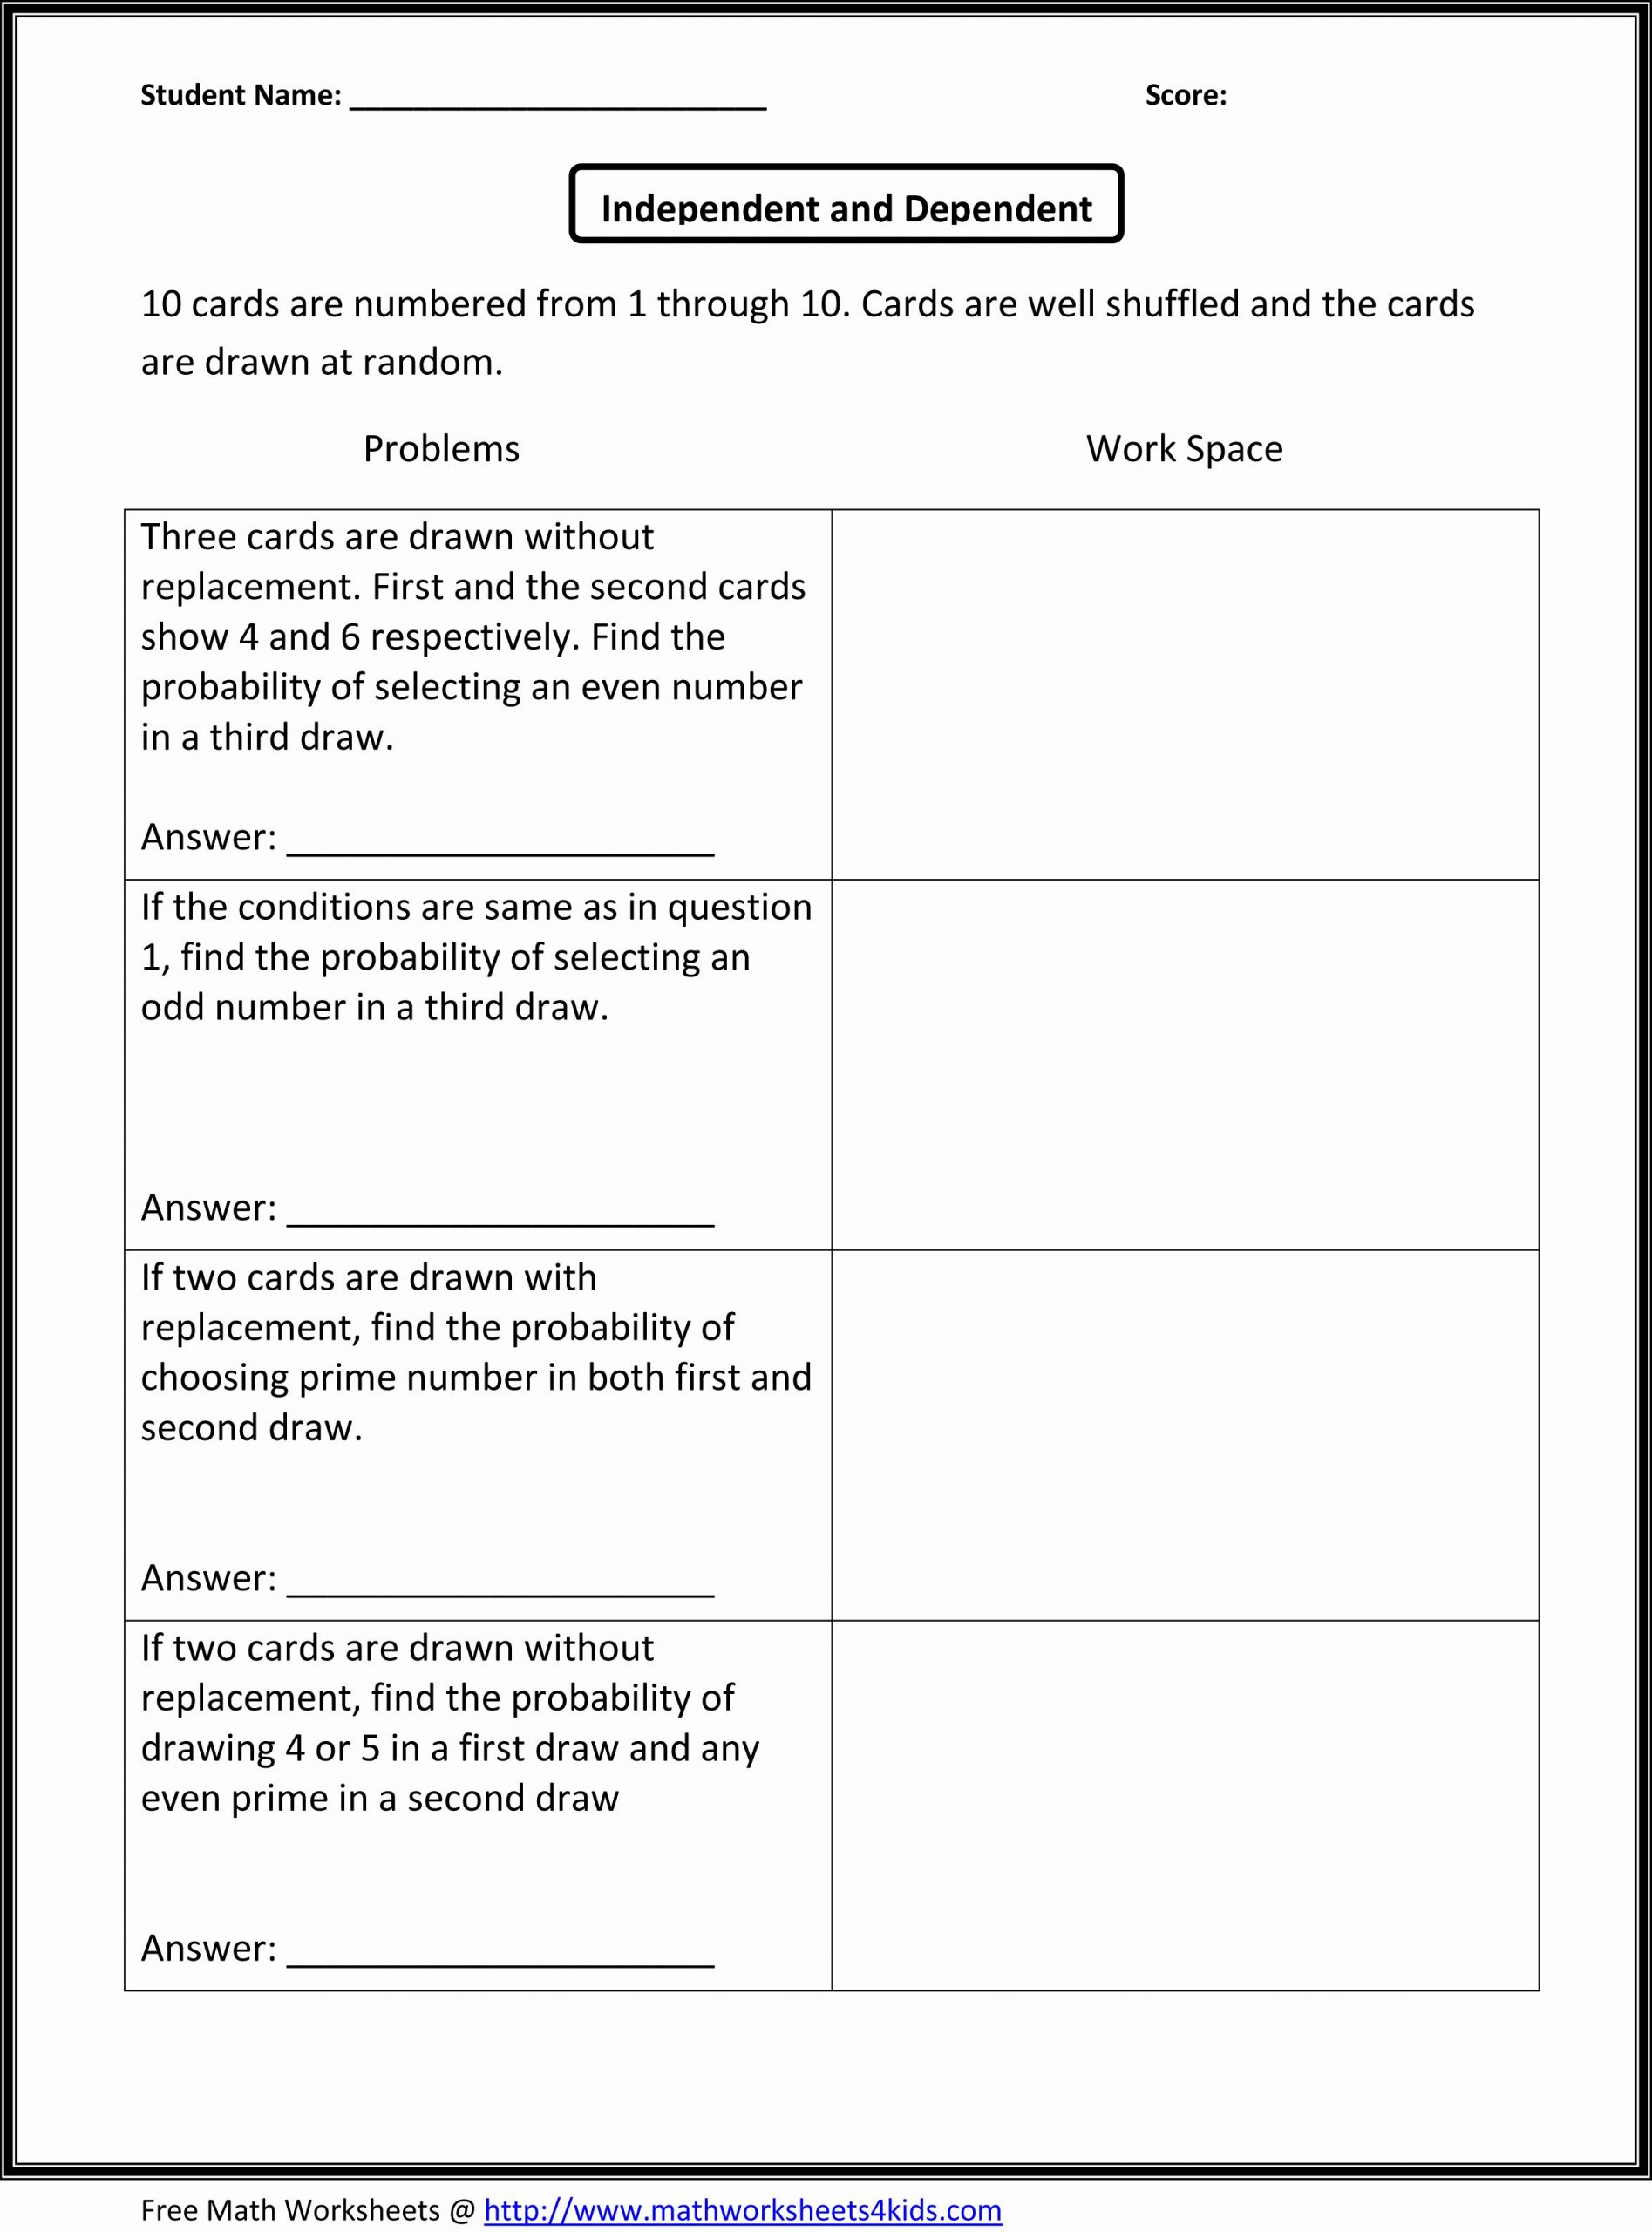 Dependent and Independent Variables Worksheet Dependent and Independent Variables Worksheet with Answers